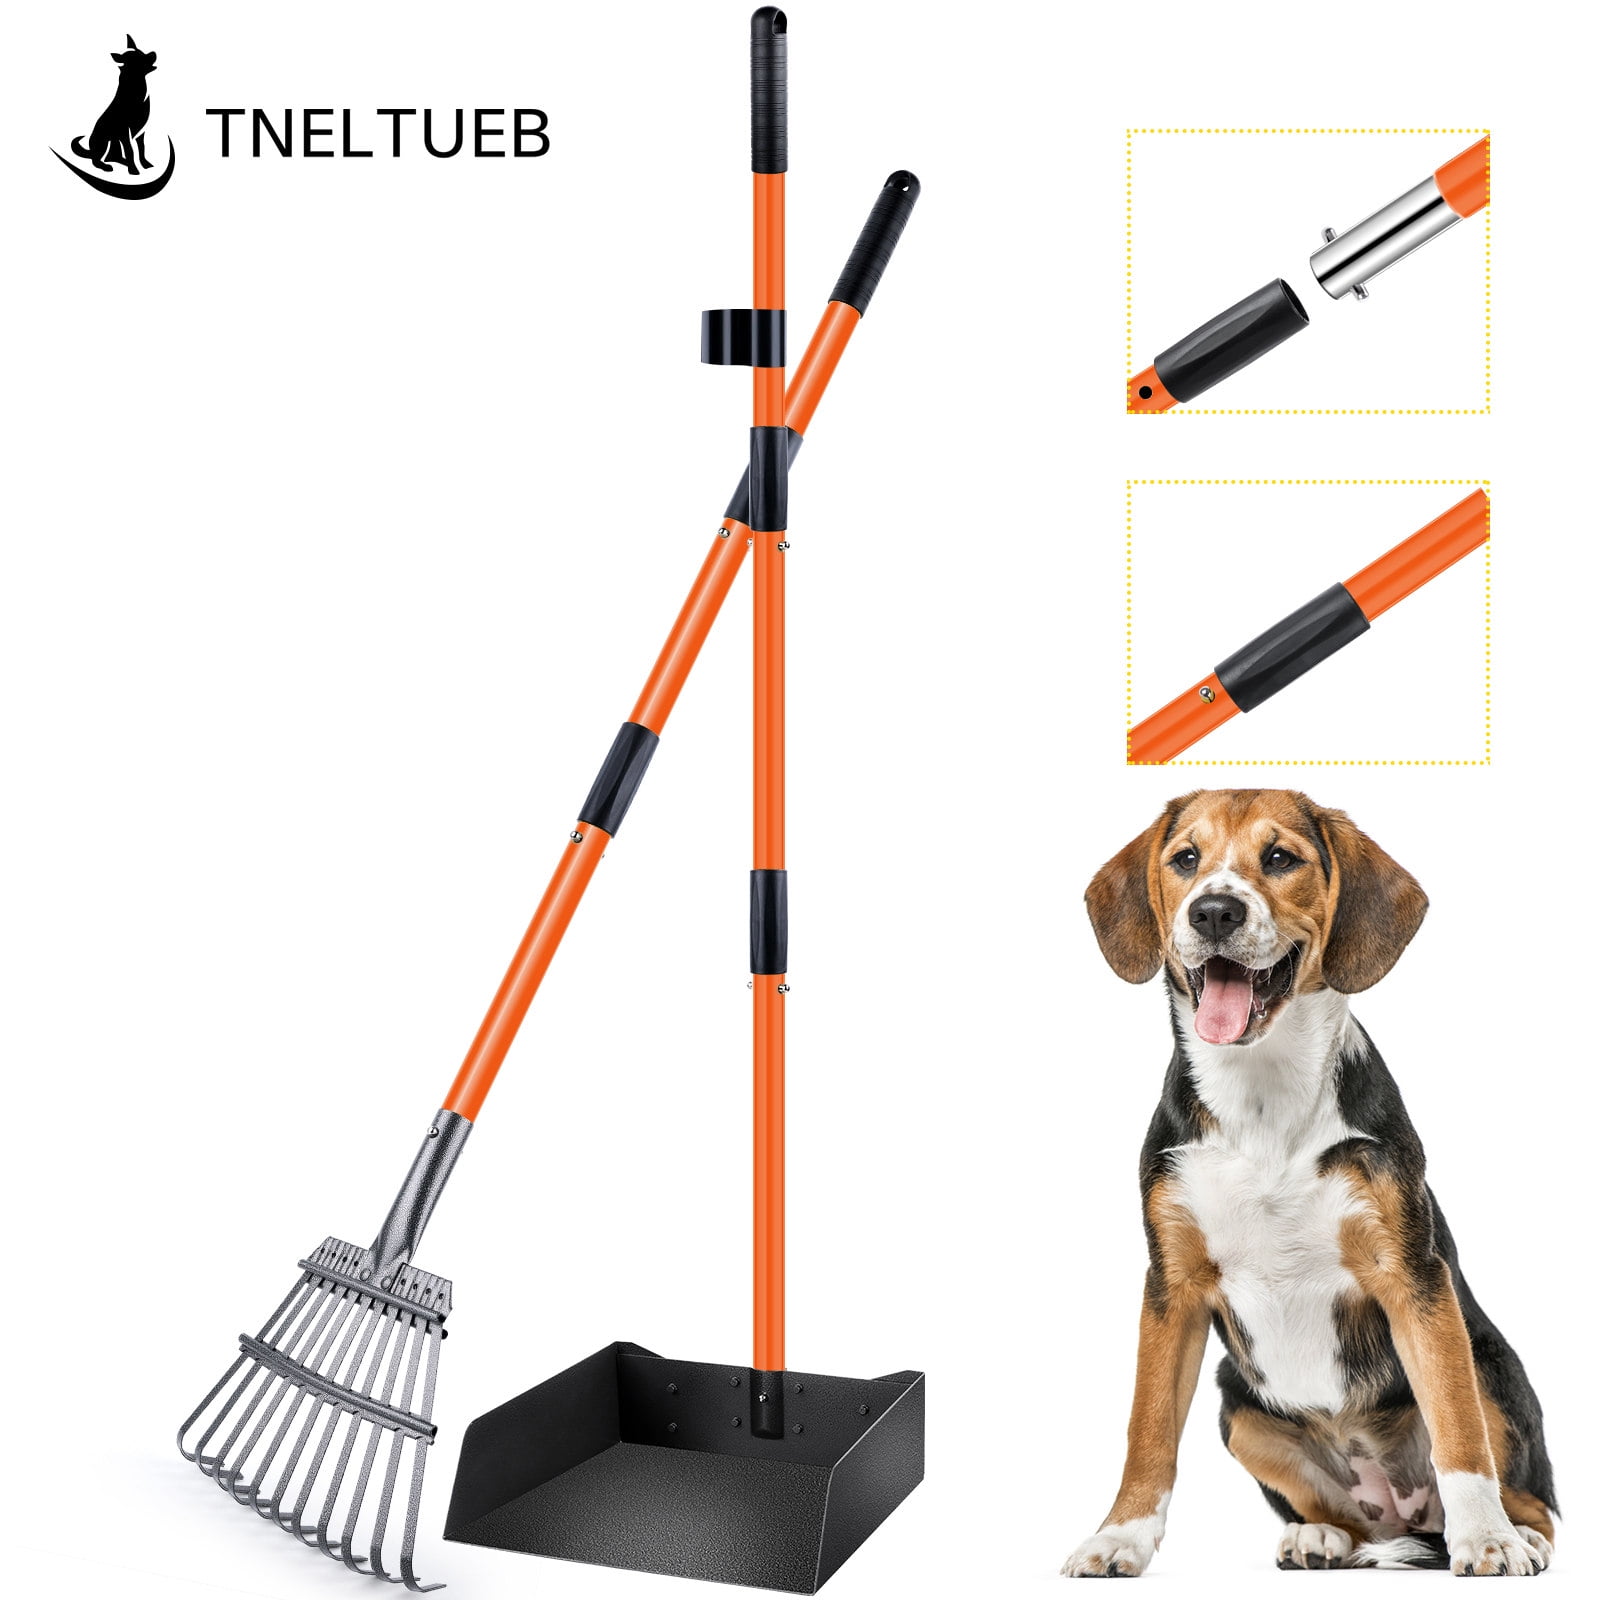 HEAPETBON 31.5 Foldable Pet Pooper Scooper for Large Dogs and Cats Jaw Poop Scoop Pet Pickup Tool 